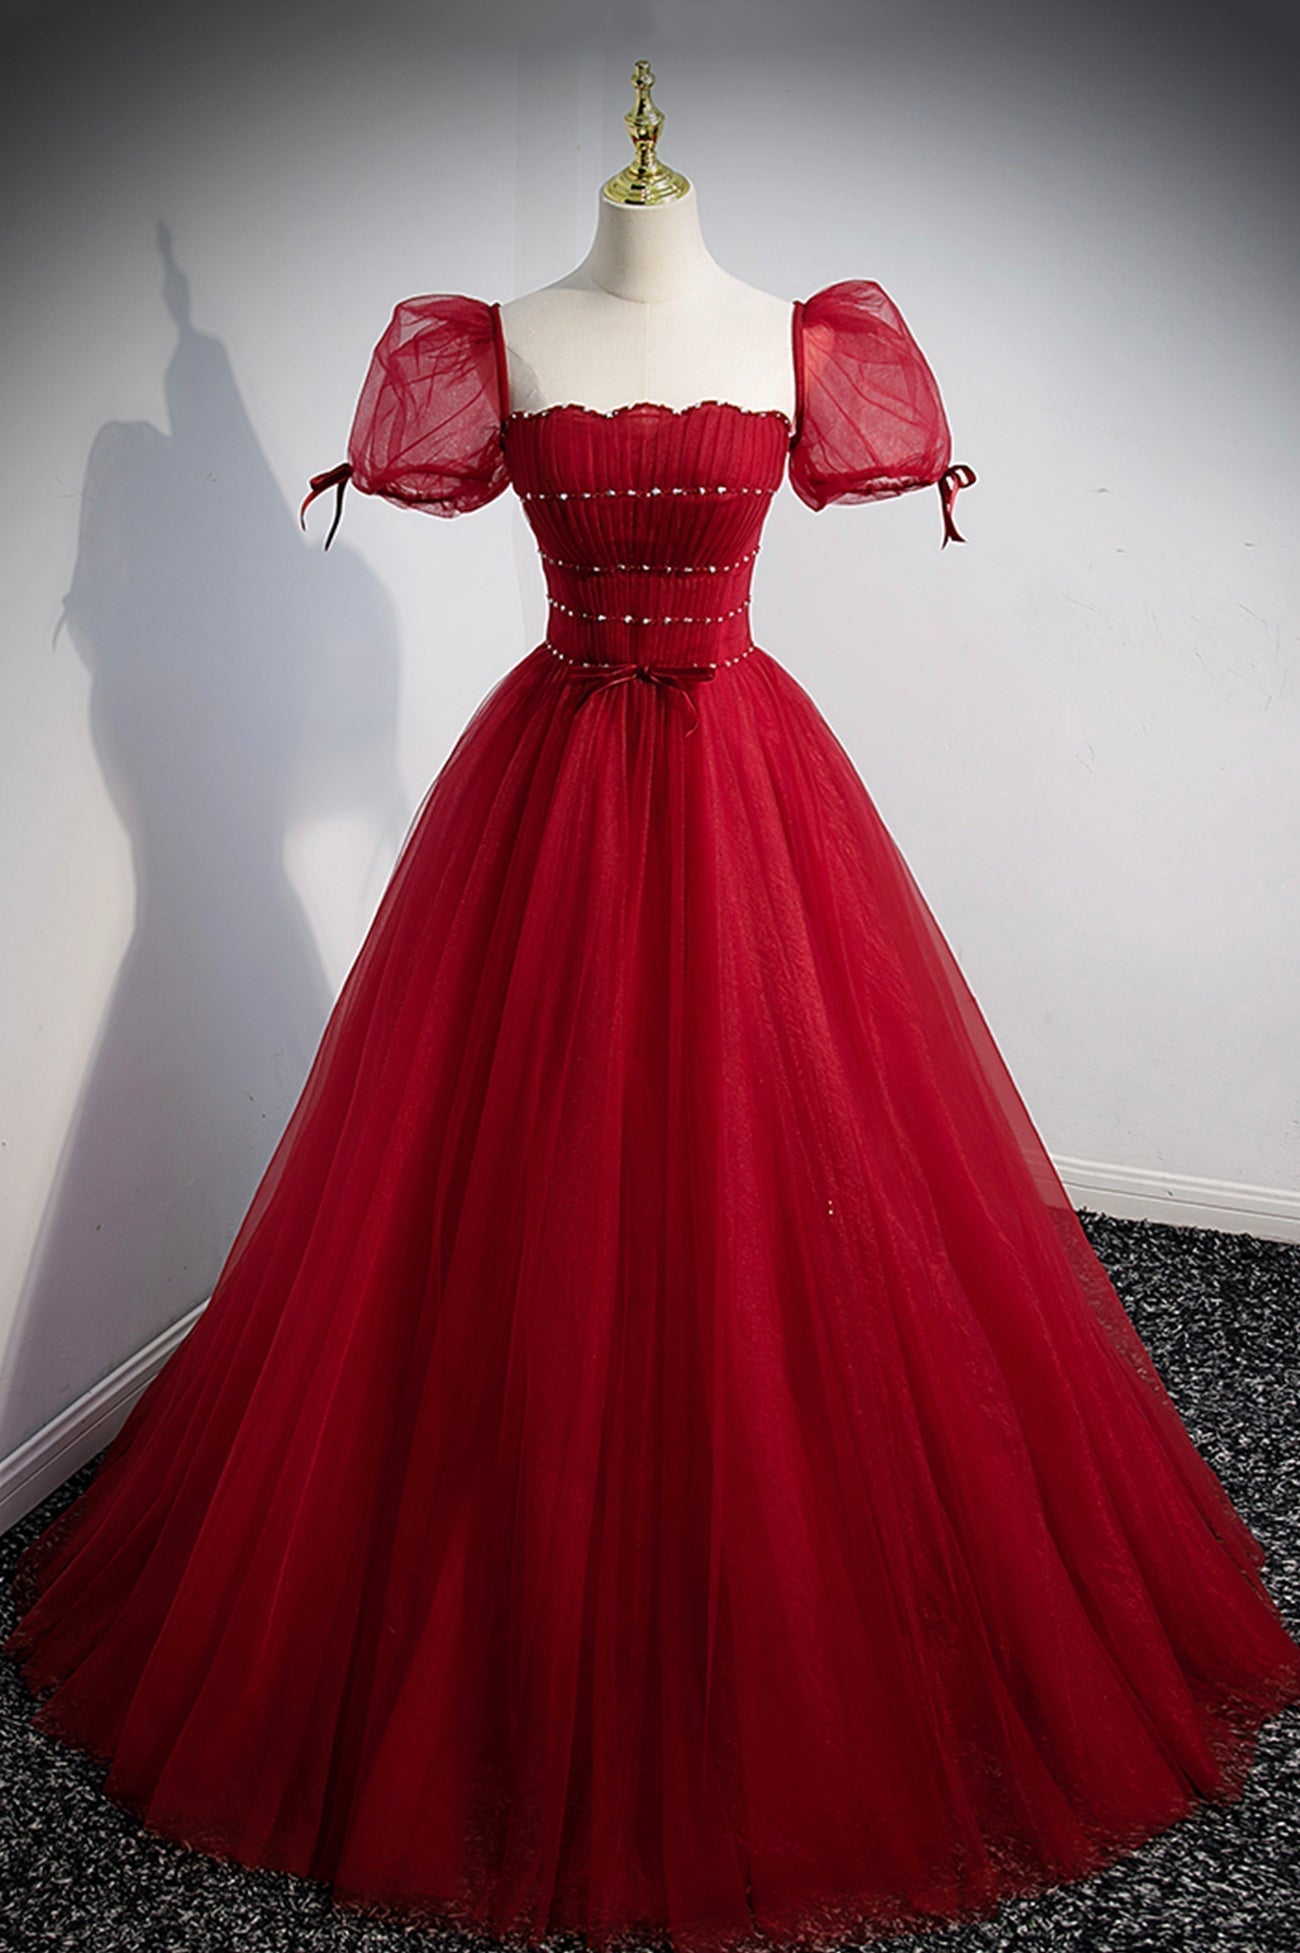 Red Beaded Tulle A-Line Long Corset Formal Dress, Red Corset Prom Dress outfits, Party Dress Wedding